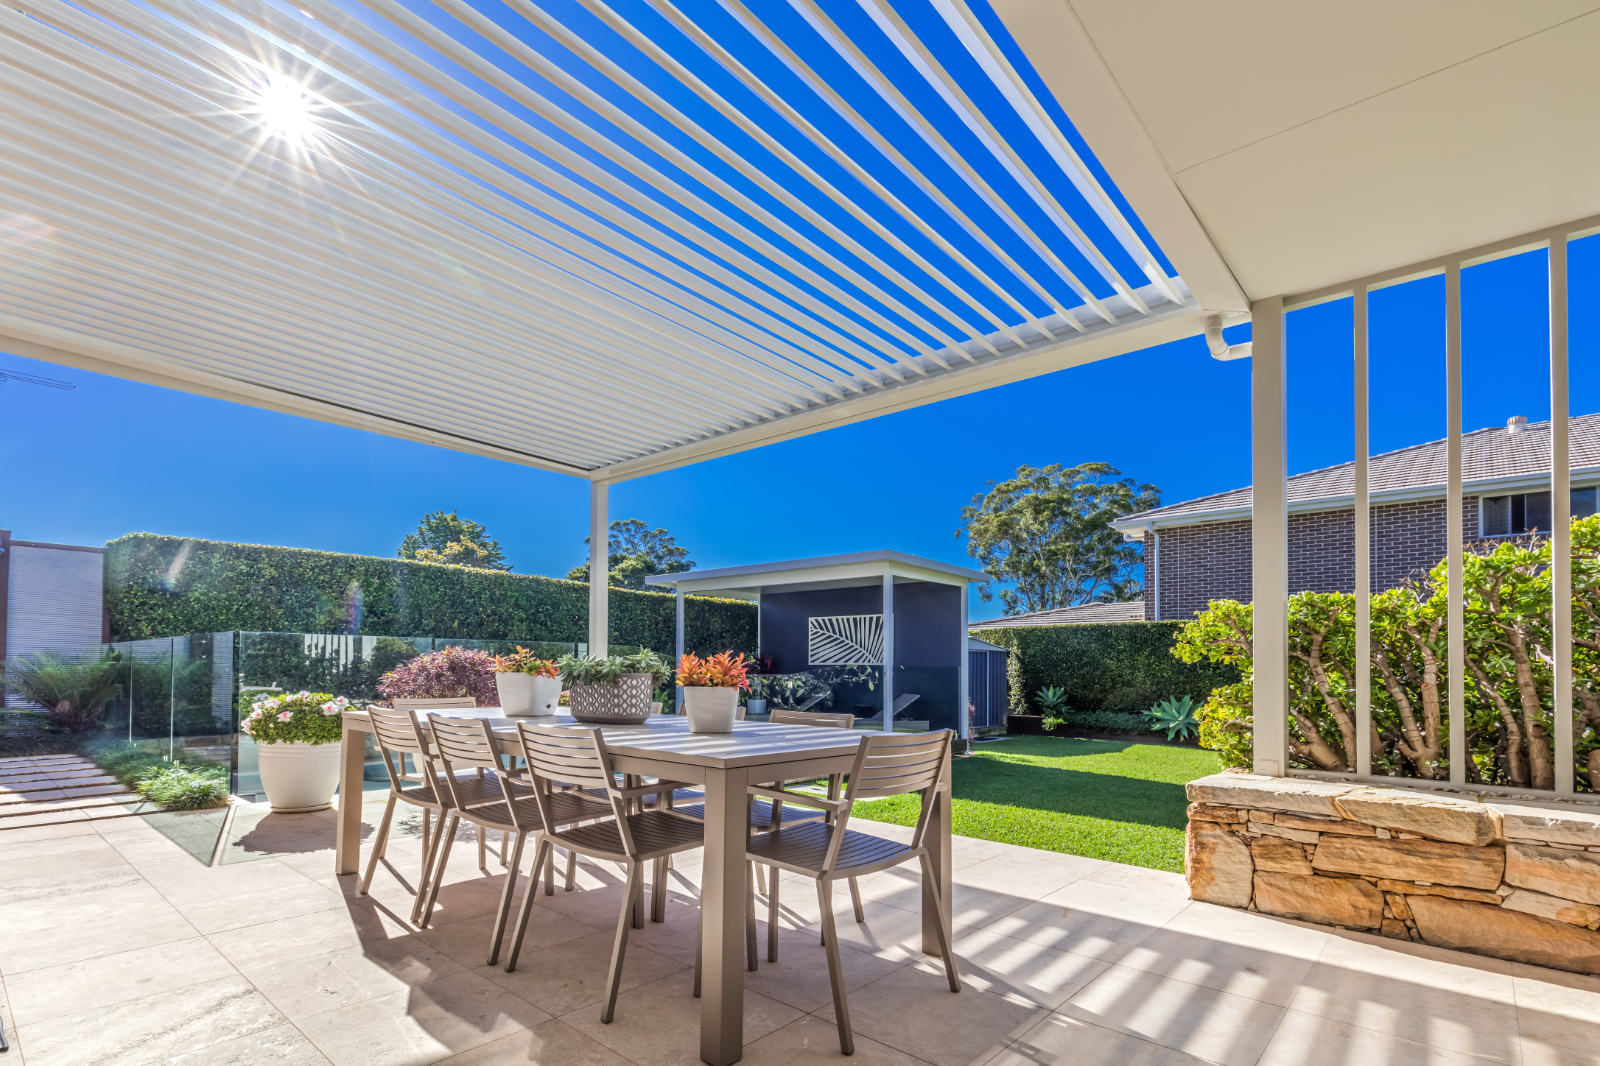 Gymea Bay pergola on a sunny day, showing how the opening and closing roof louvres control the sun and shade.